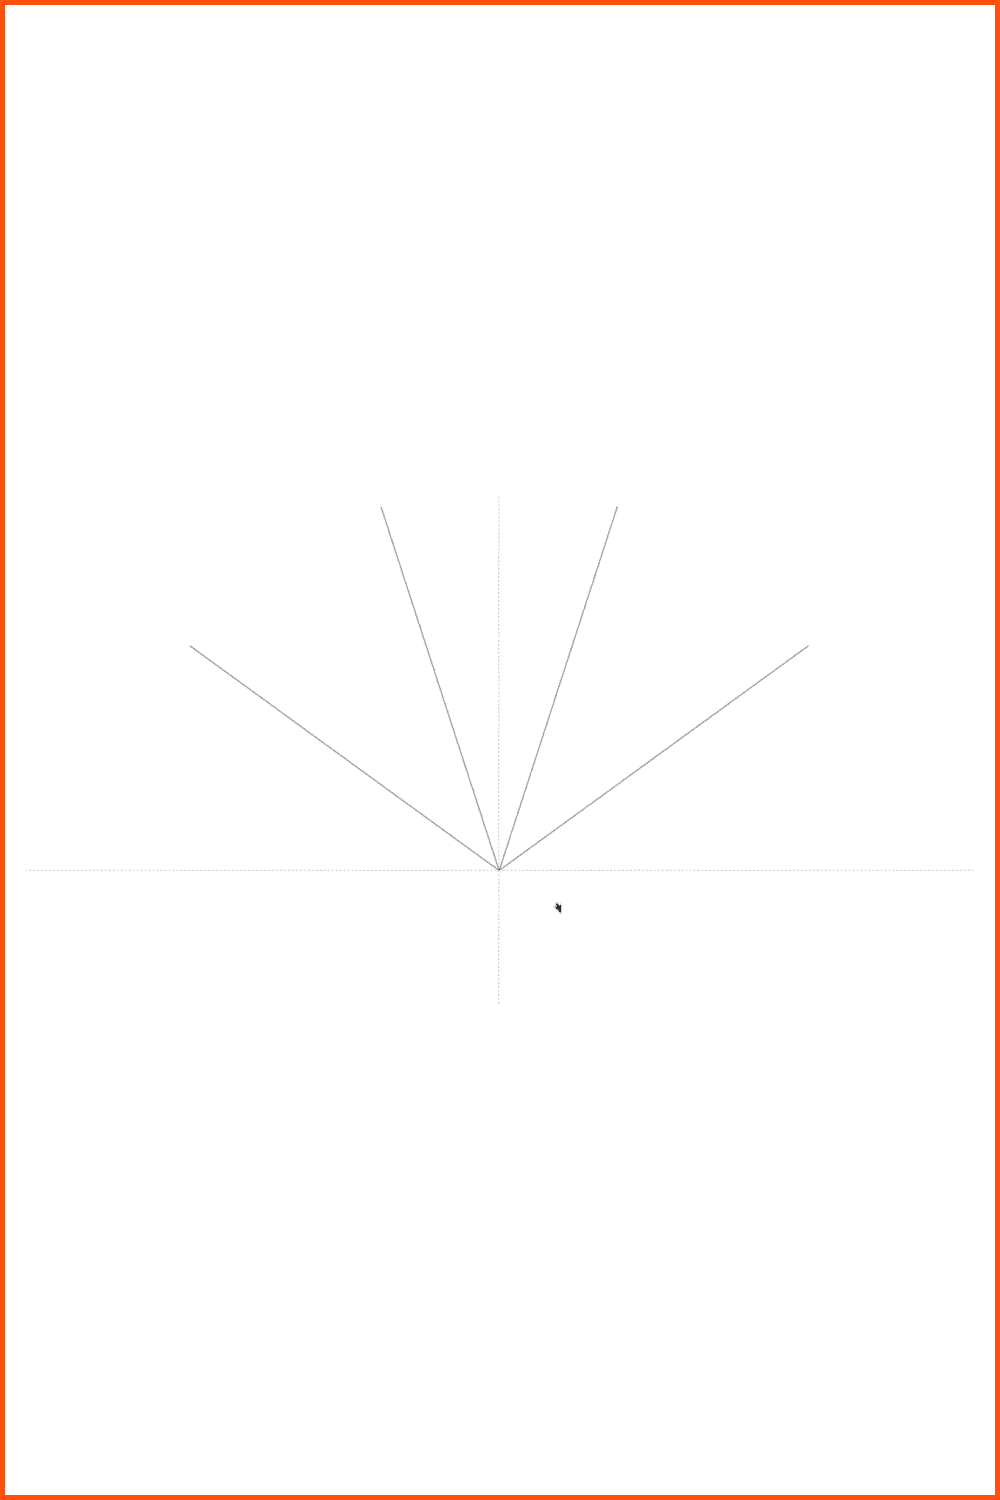 4 lines at different angles with one end.